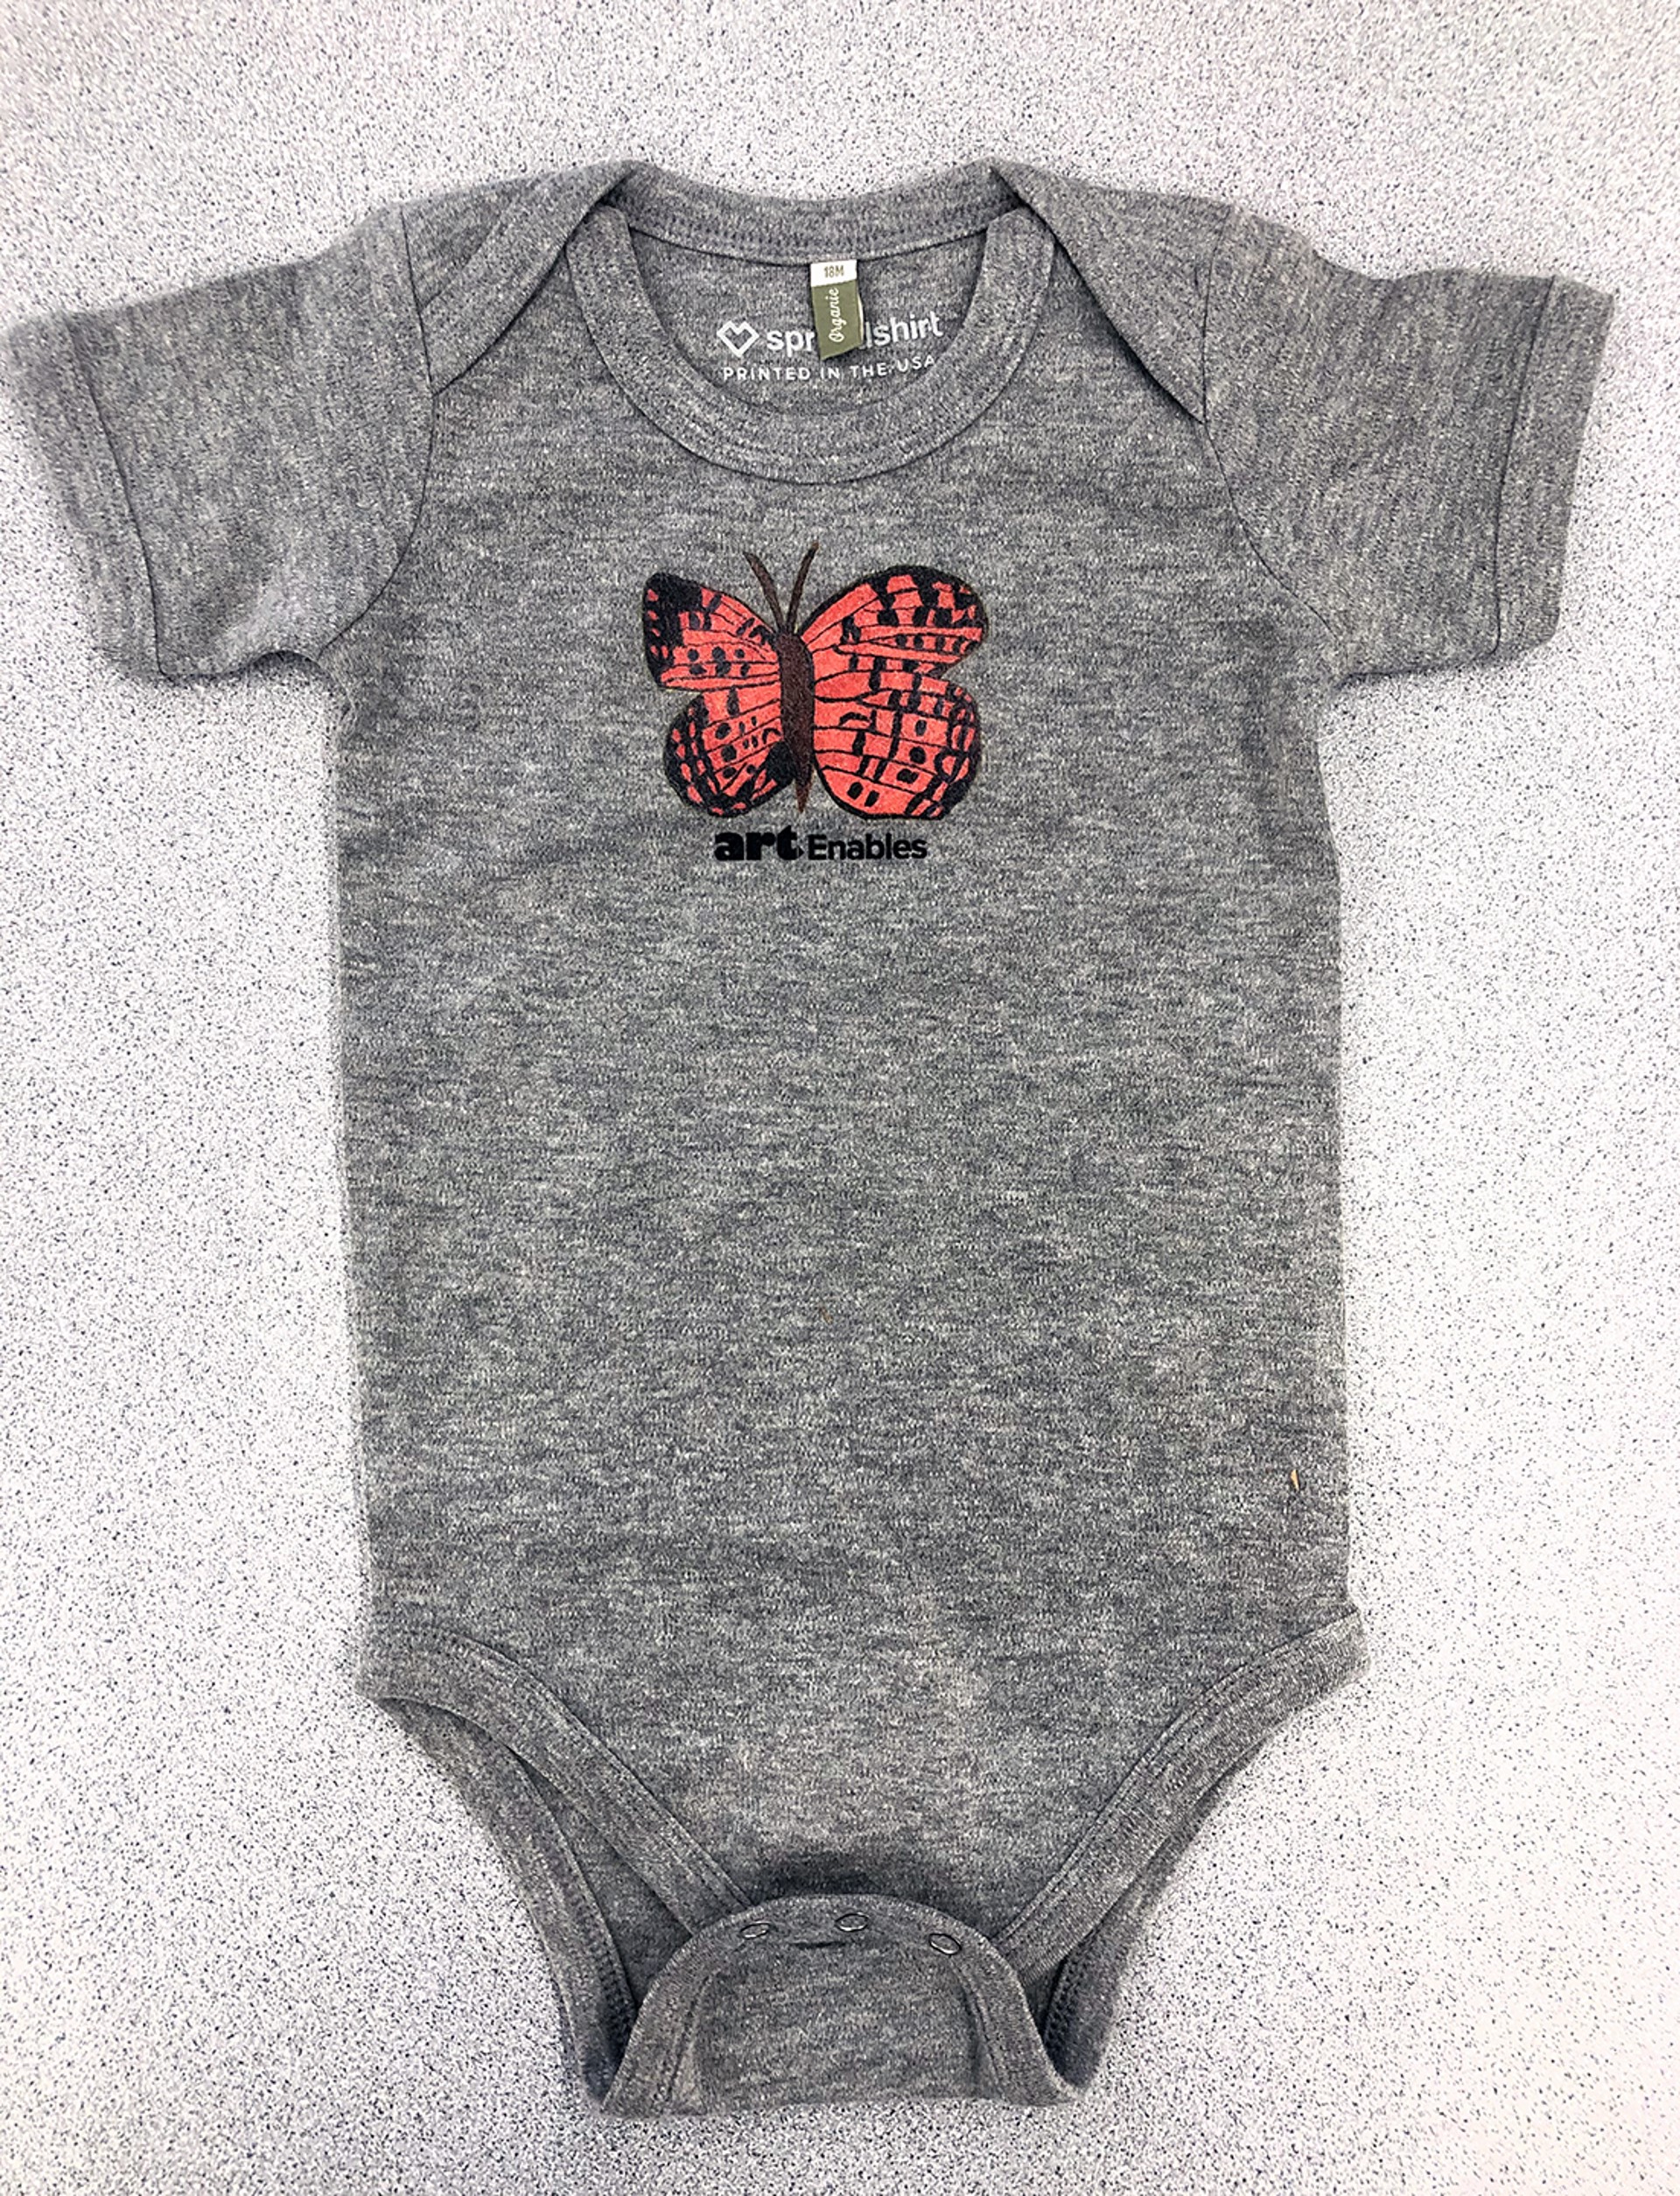 Unisex Baby Onesie - Butterfly (Paul Lewis) - 18 months (heather gray) by Art Enables Merchandise